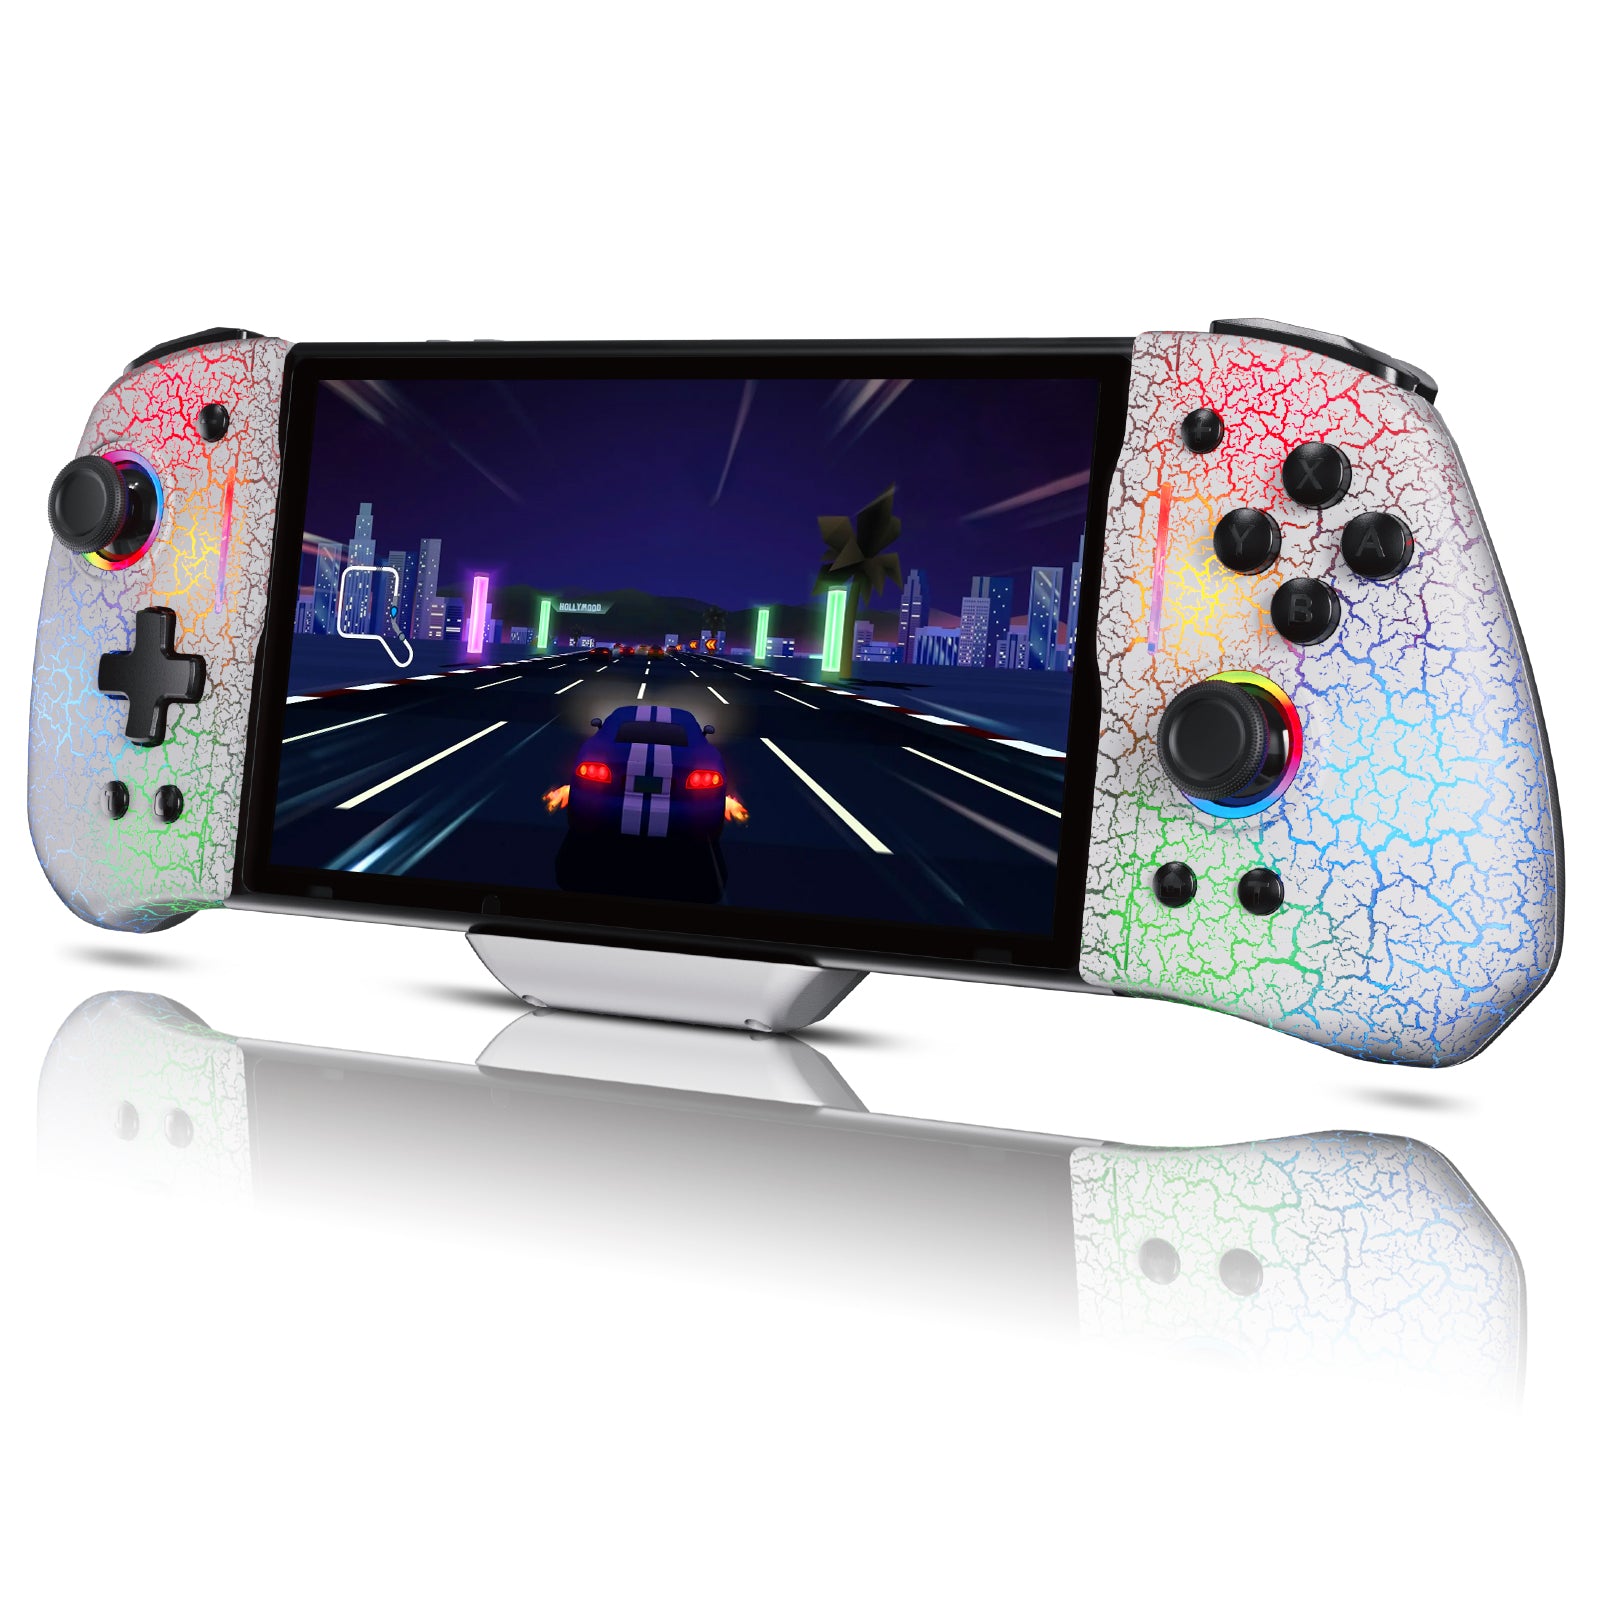 The image exhibits the white cracked skin and RGB lighting effects of the Bluetooth controller